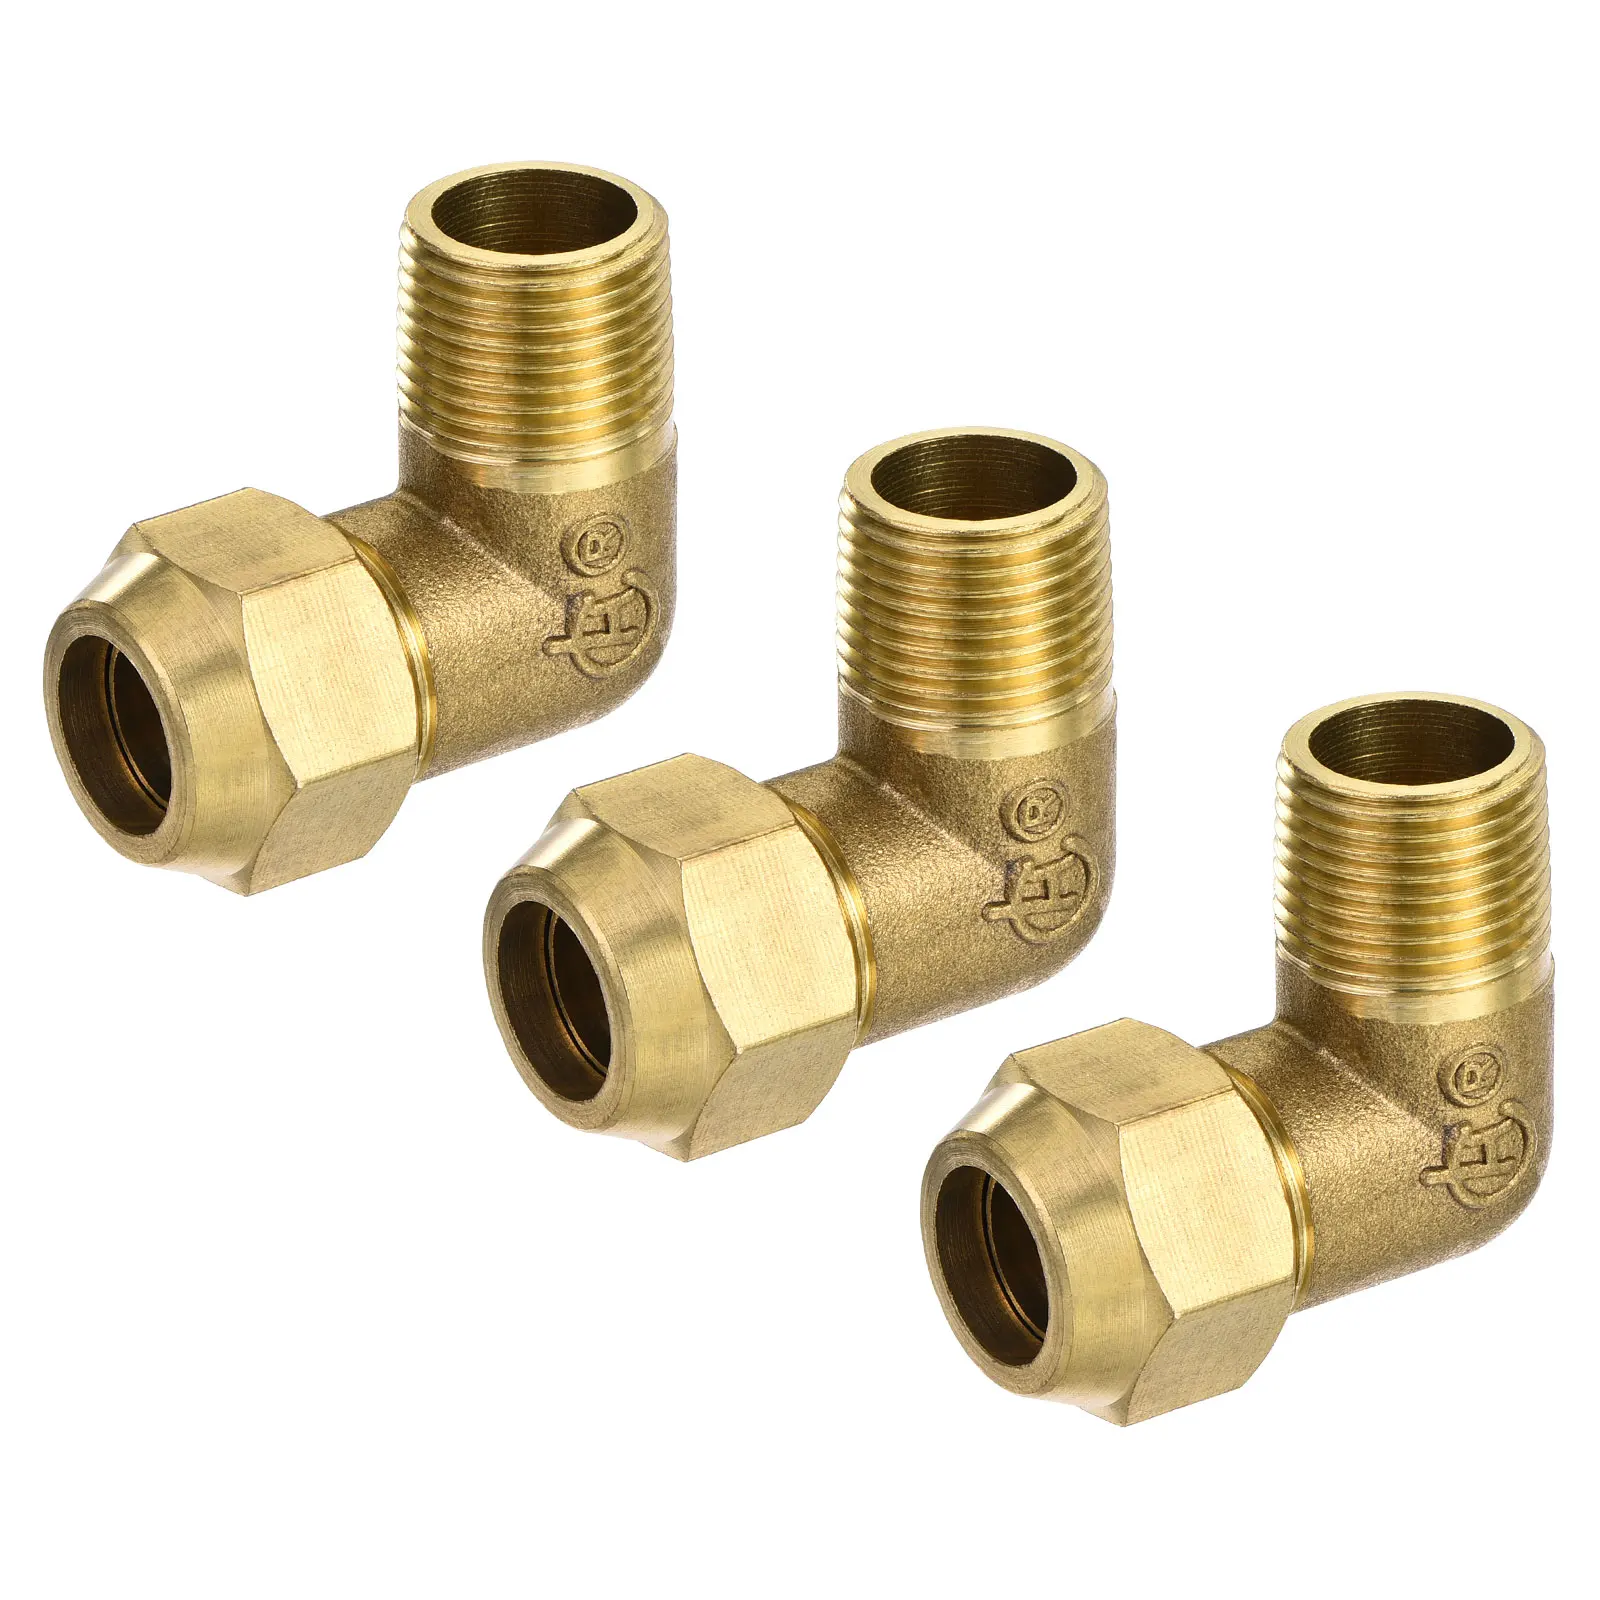 

Uxcell Brass Compression Tube Fitting 12mm Tube OD to 3/8PT Male Thread Elbow Fittings Pack of 3